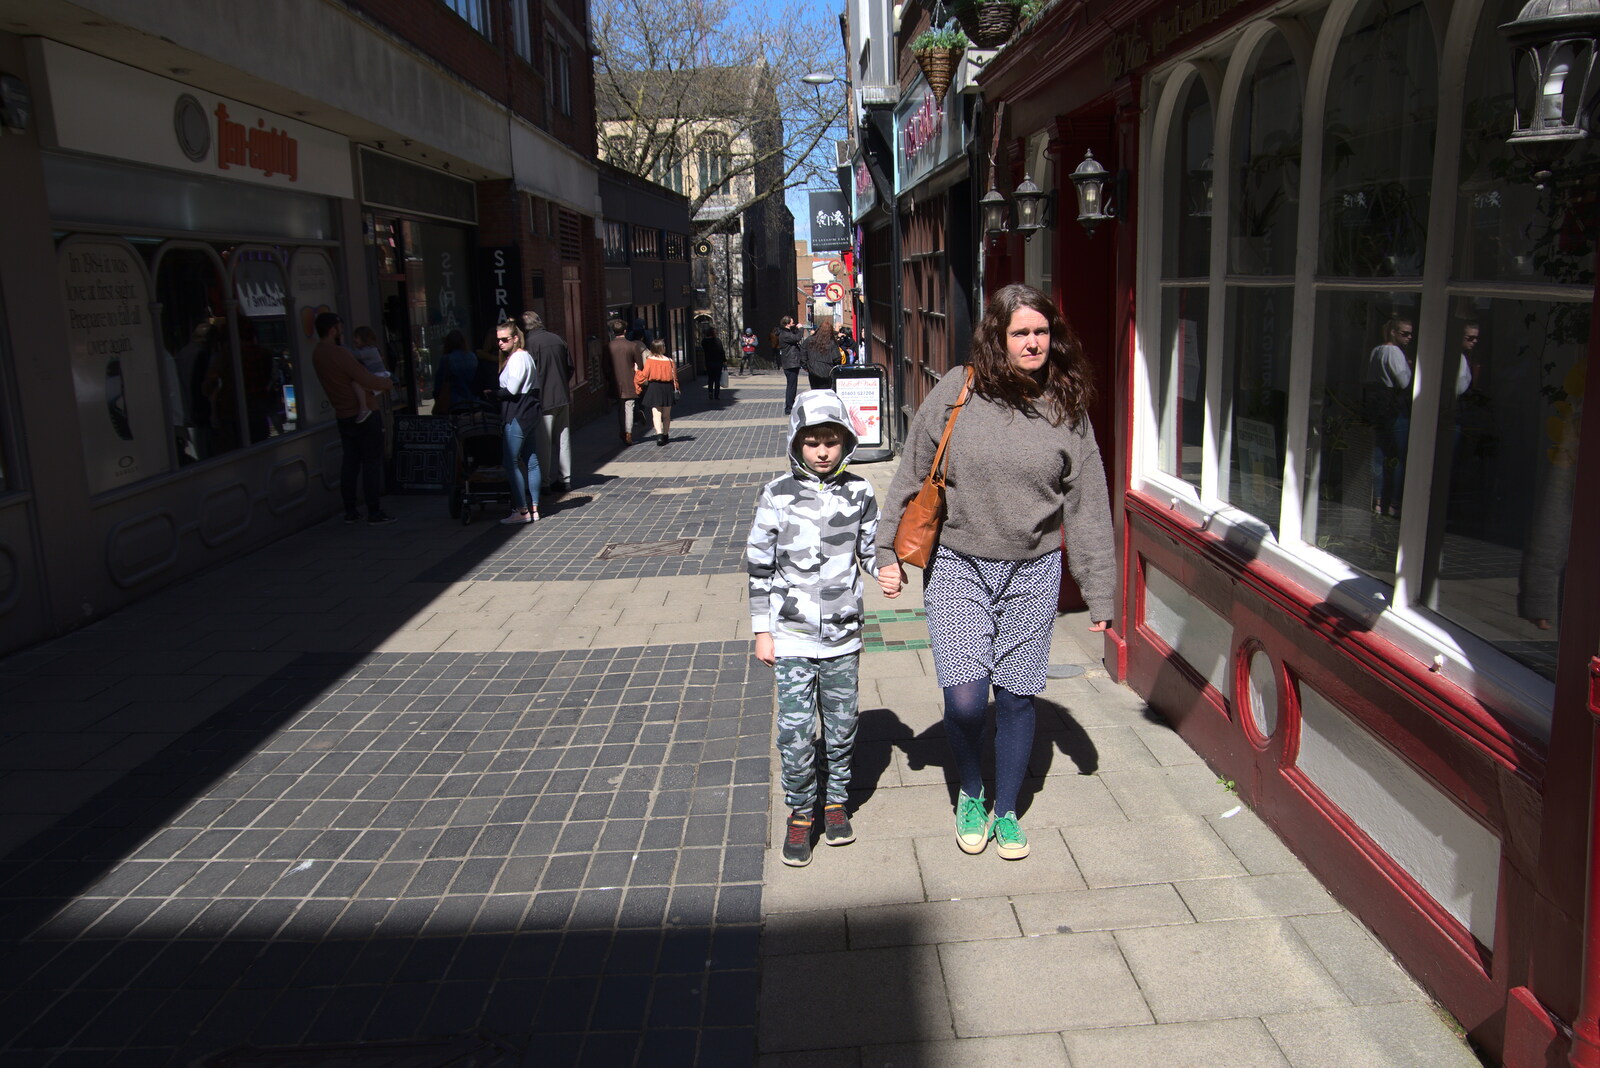 Harry and Isobel on Upper Giles Street from The Death of Debenhams, Rampant Horse Street, Norwich, Norfolk - 17th April 2021